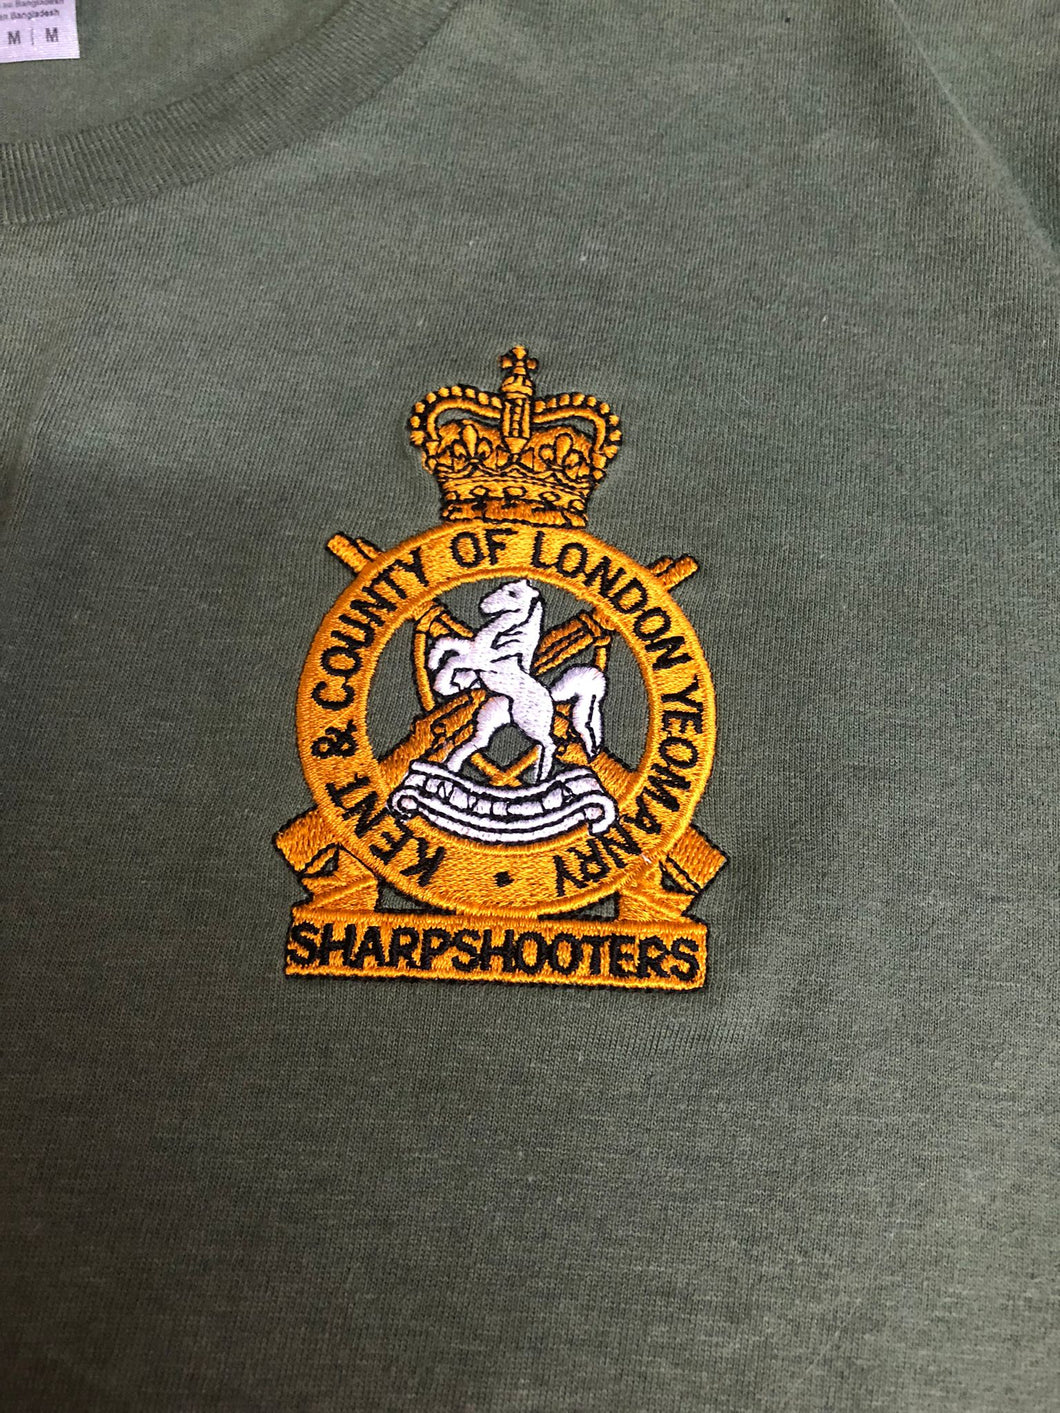 Kent & London Yeomanry Sharpshooters - Embroidered - Choose your Garment